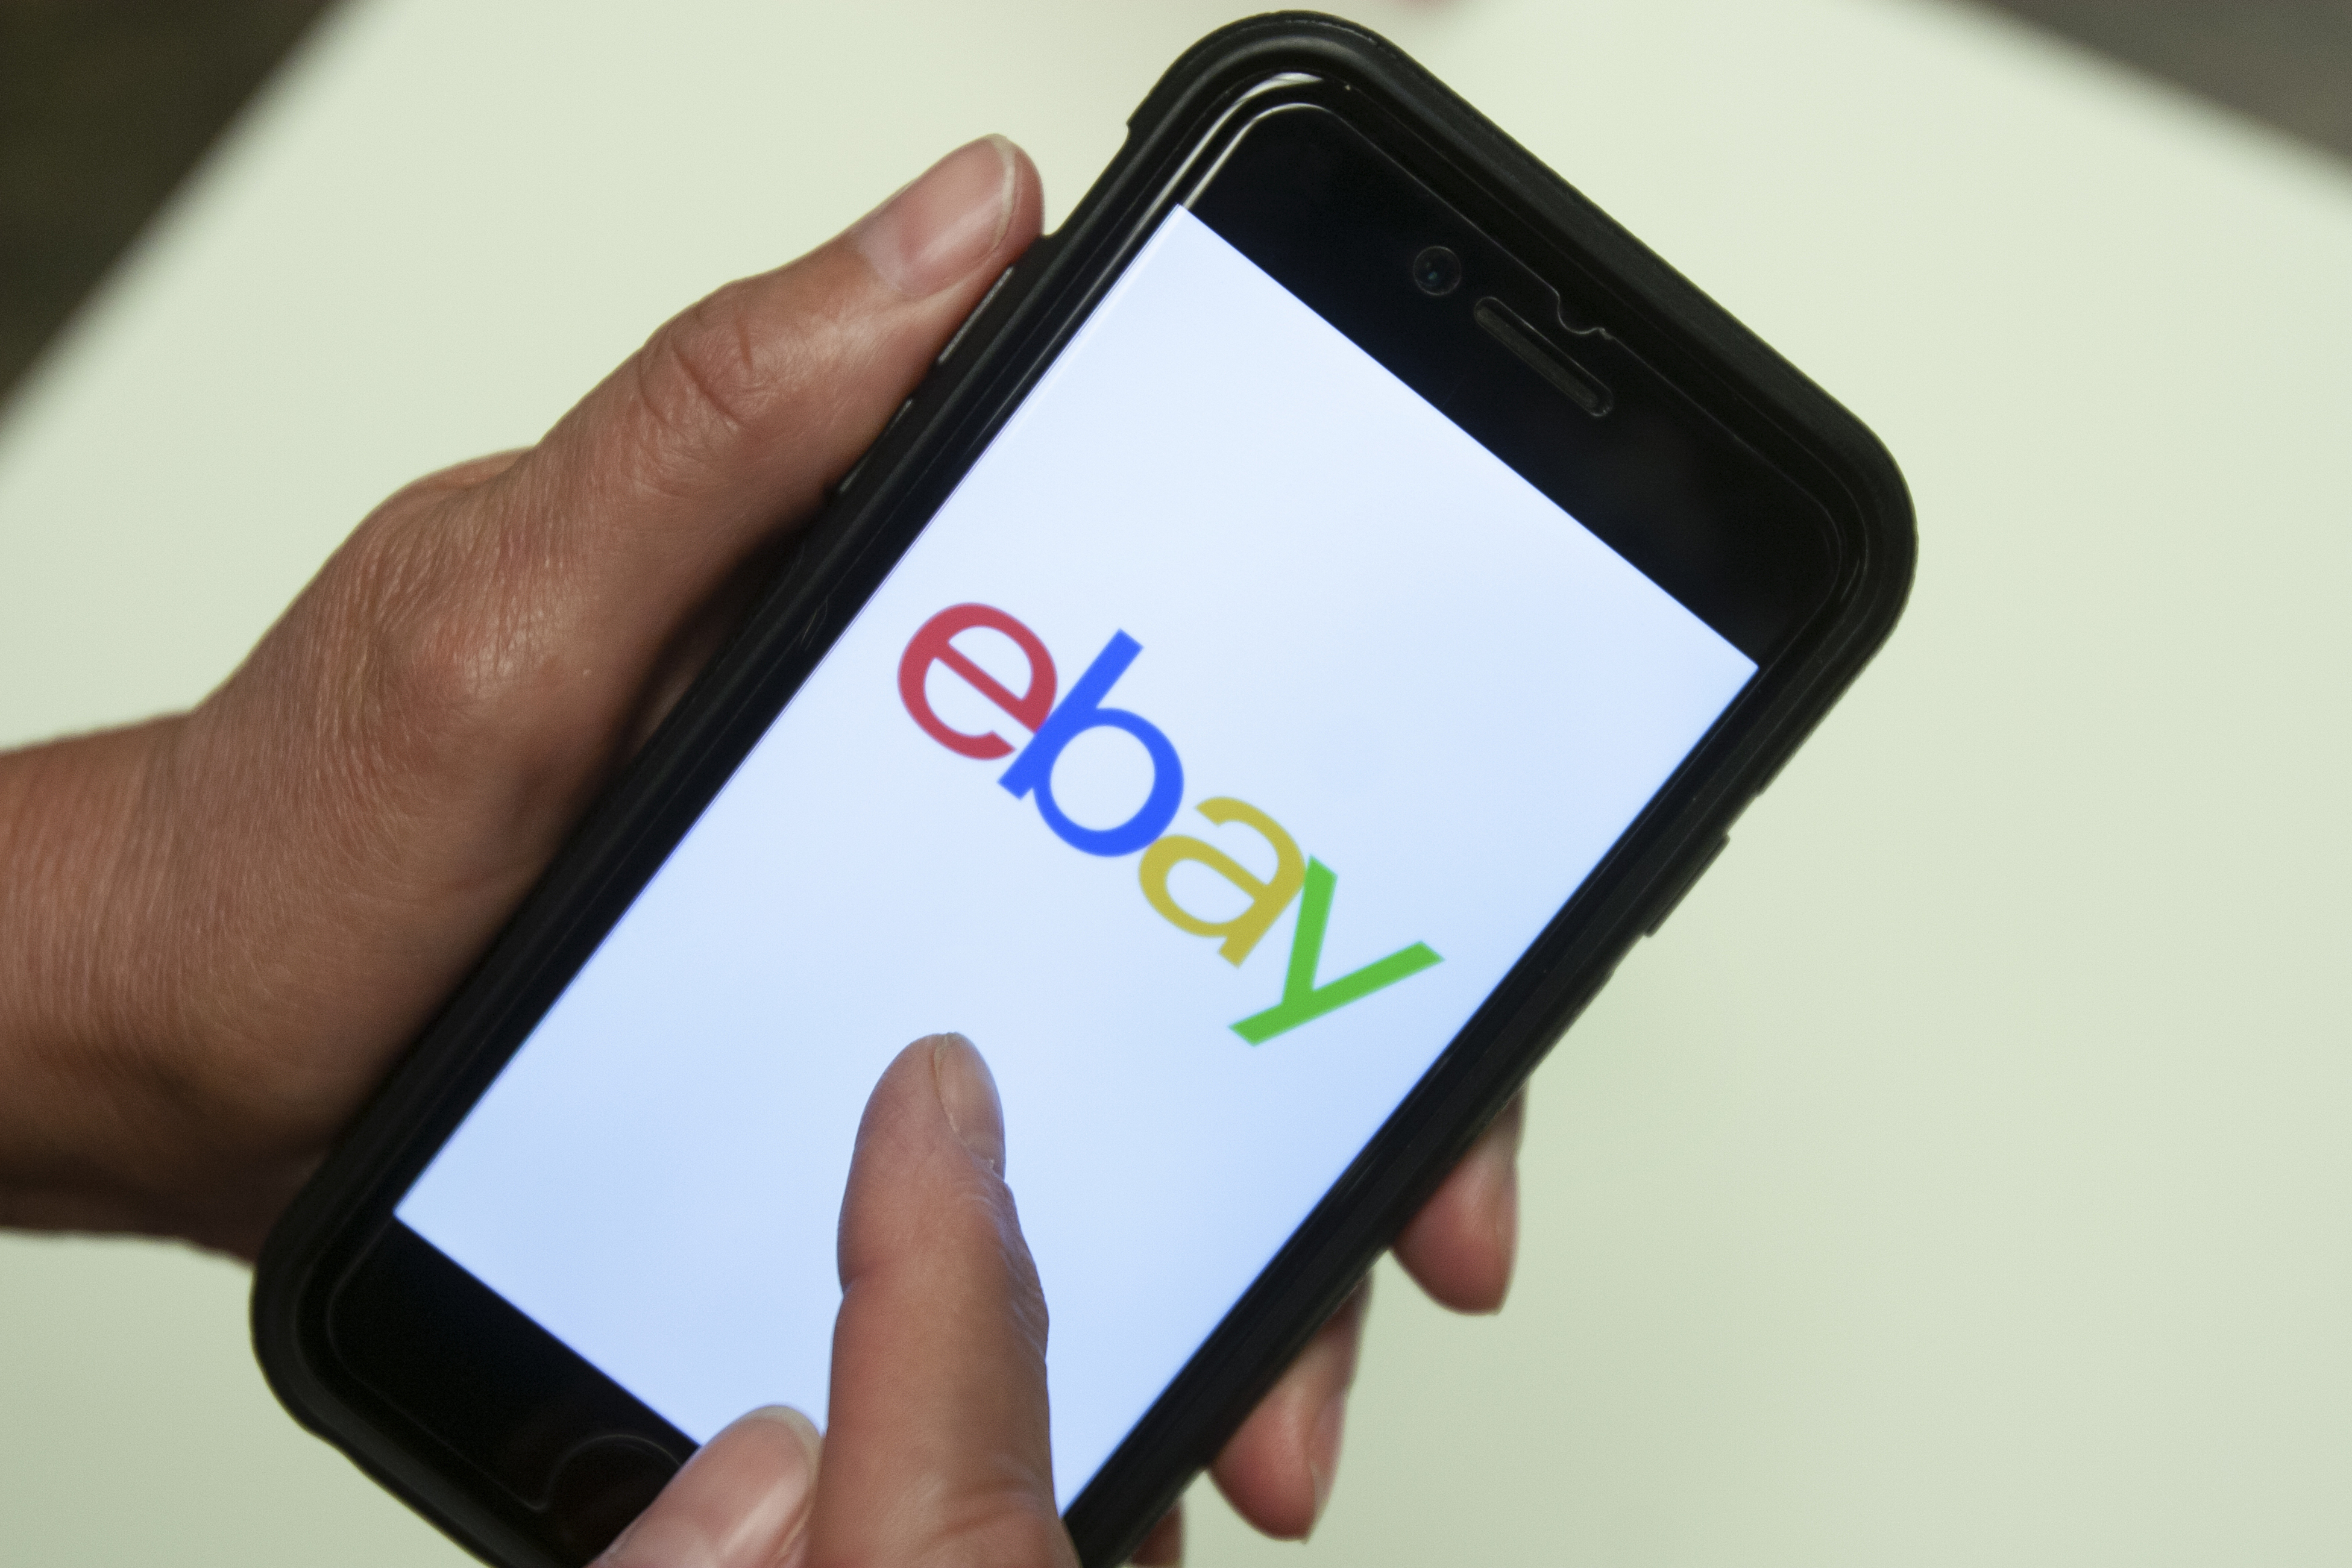 FILE - An eBay app is shown on a mobile phone, July 11, 2019, in Miami. Online marketplace behemoth eBay said it plans to no longer accept American Express, Wednesday, June 5, 2024, citing what the company says are “unacceptably high fees” and that customers have other payment options to shop online. I(AP Photo/Wilfredo Lee, File)